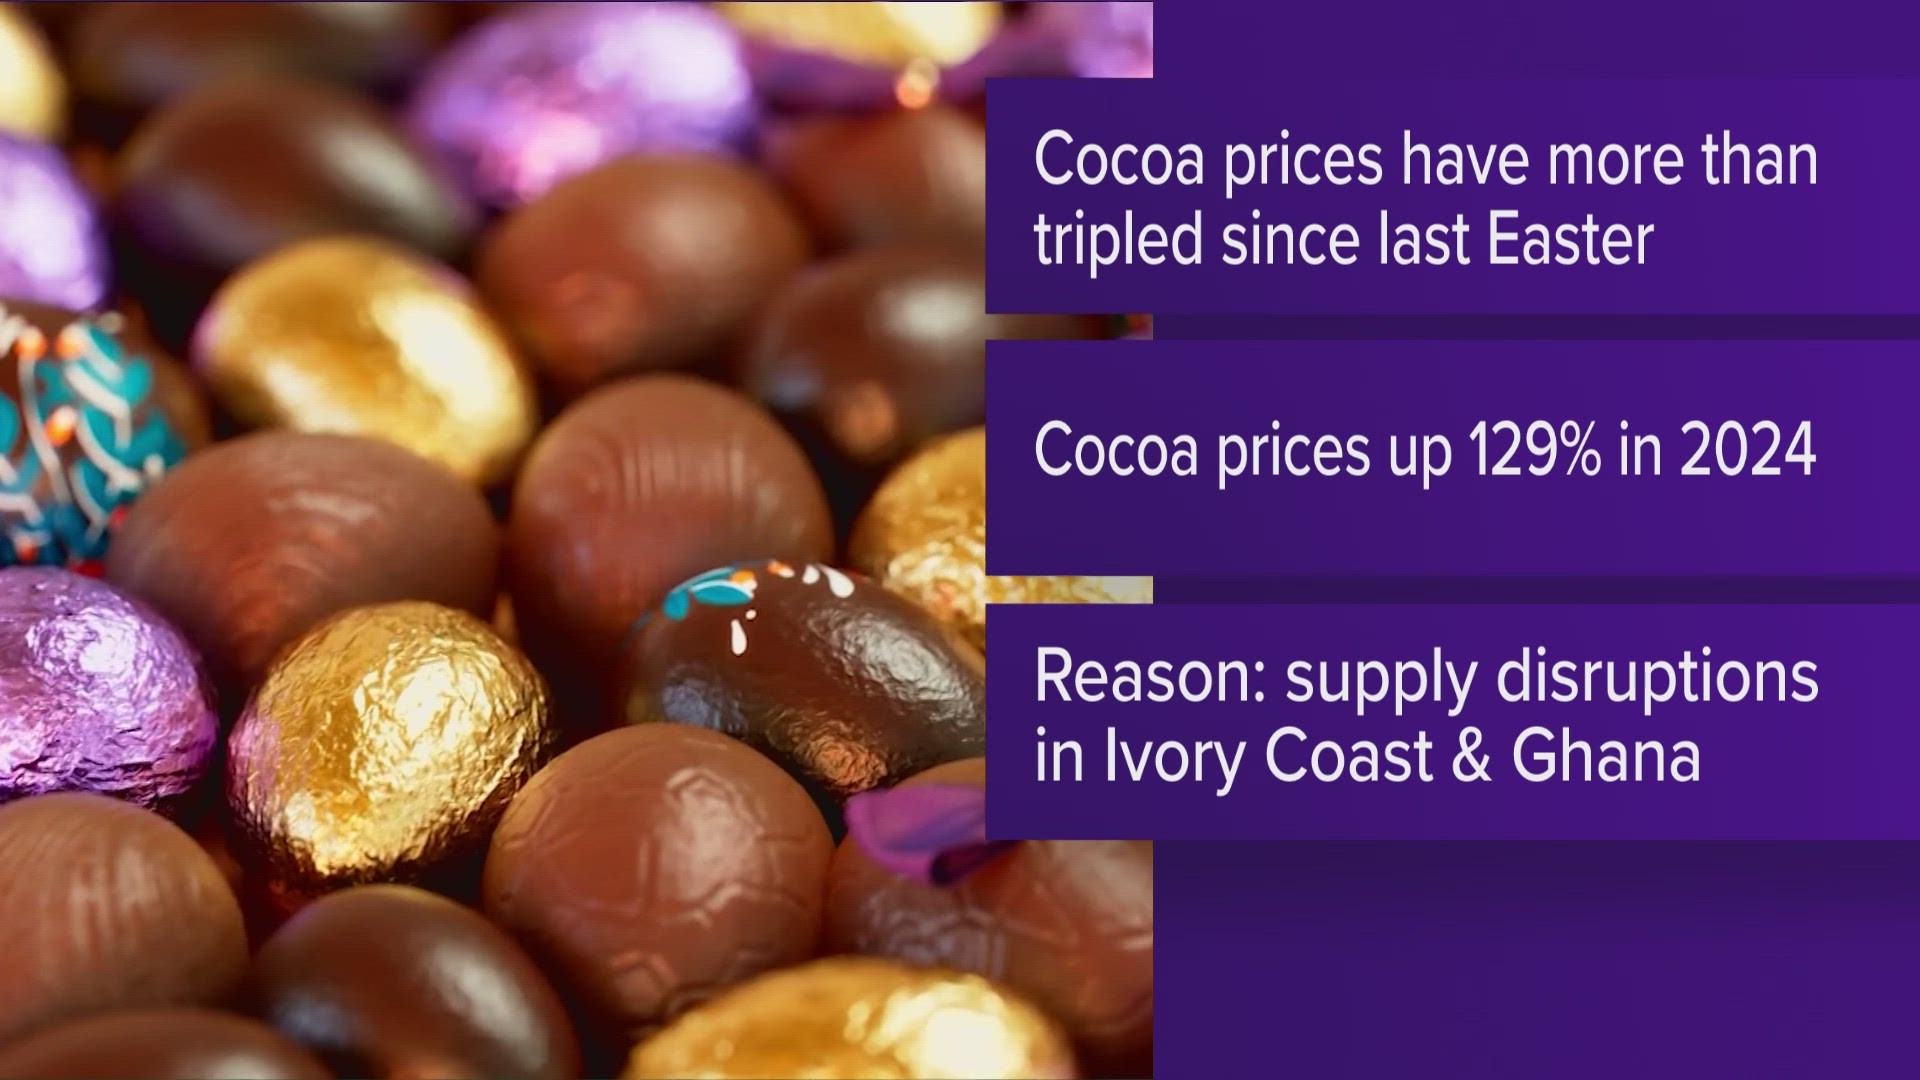 The price of cocoa has more than tripled over the past year.